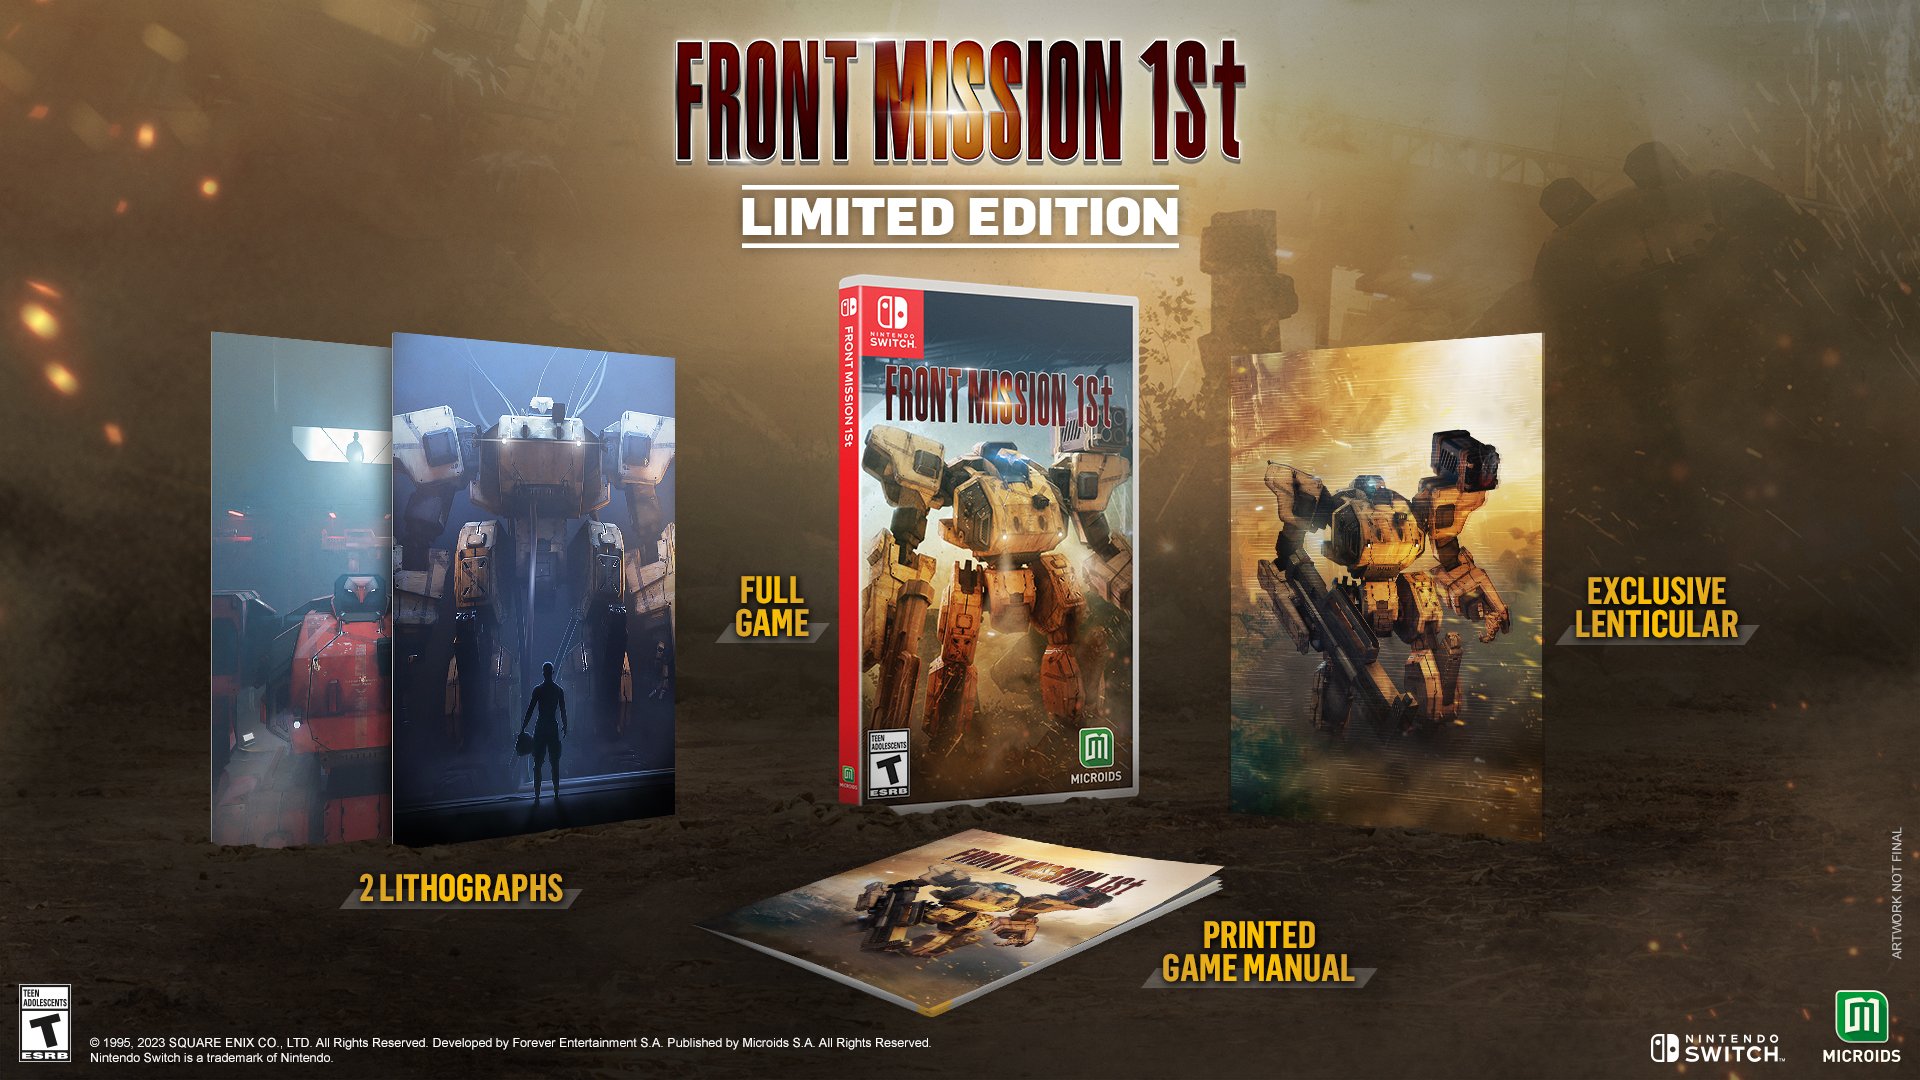 #
      FRONT MISSION 1st: Remake physical limited edition launches this spring in Europe, summer in North America